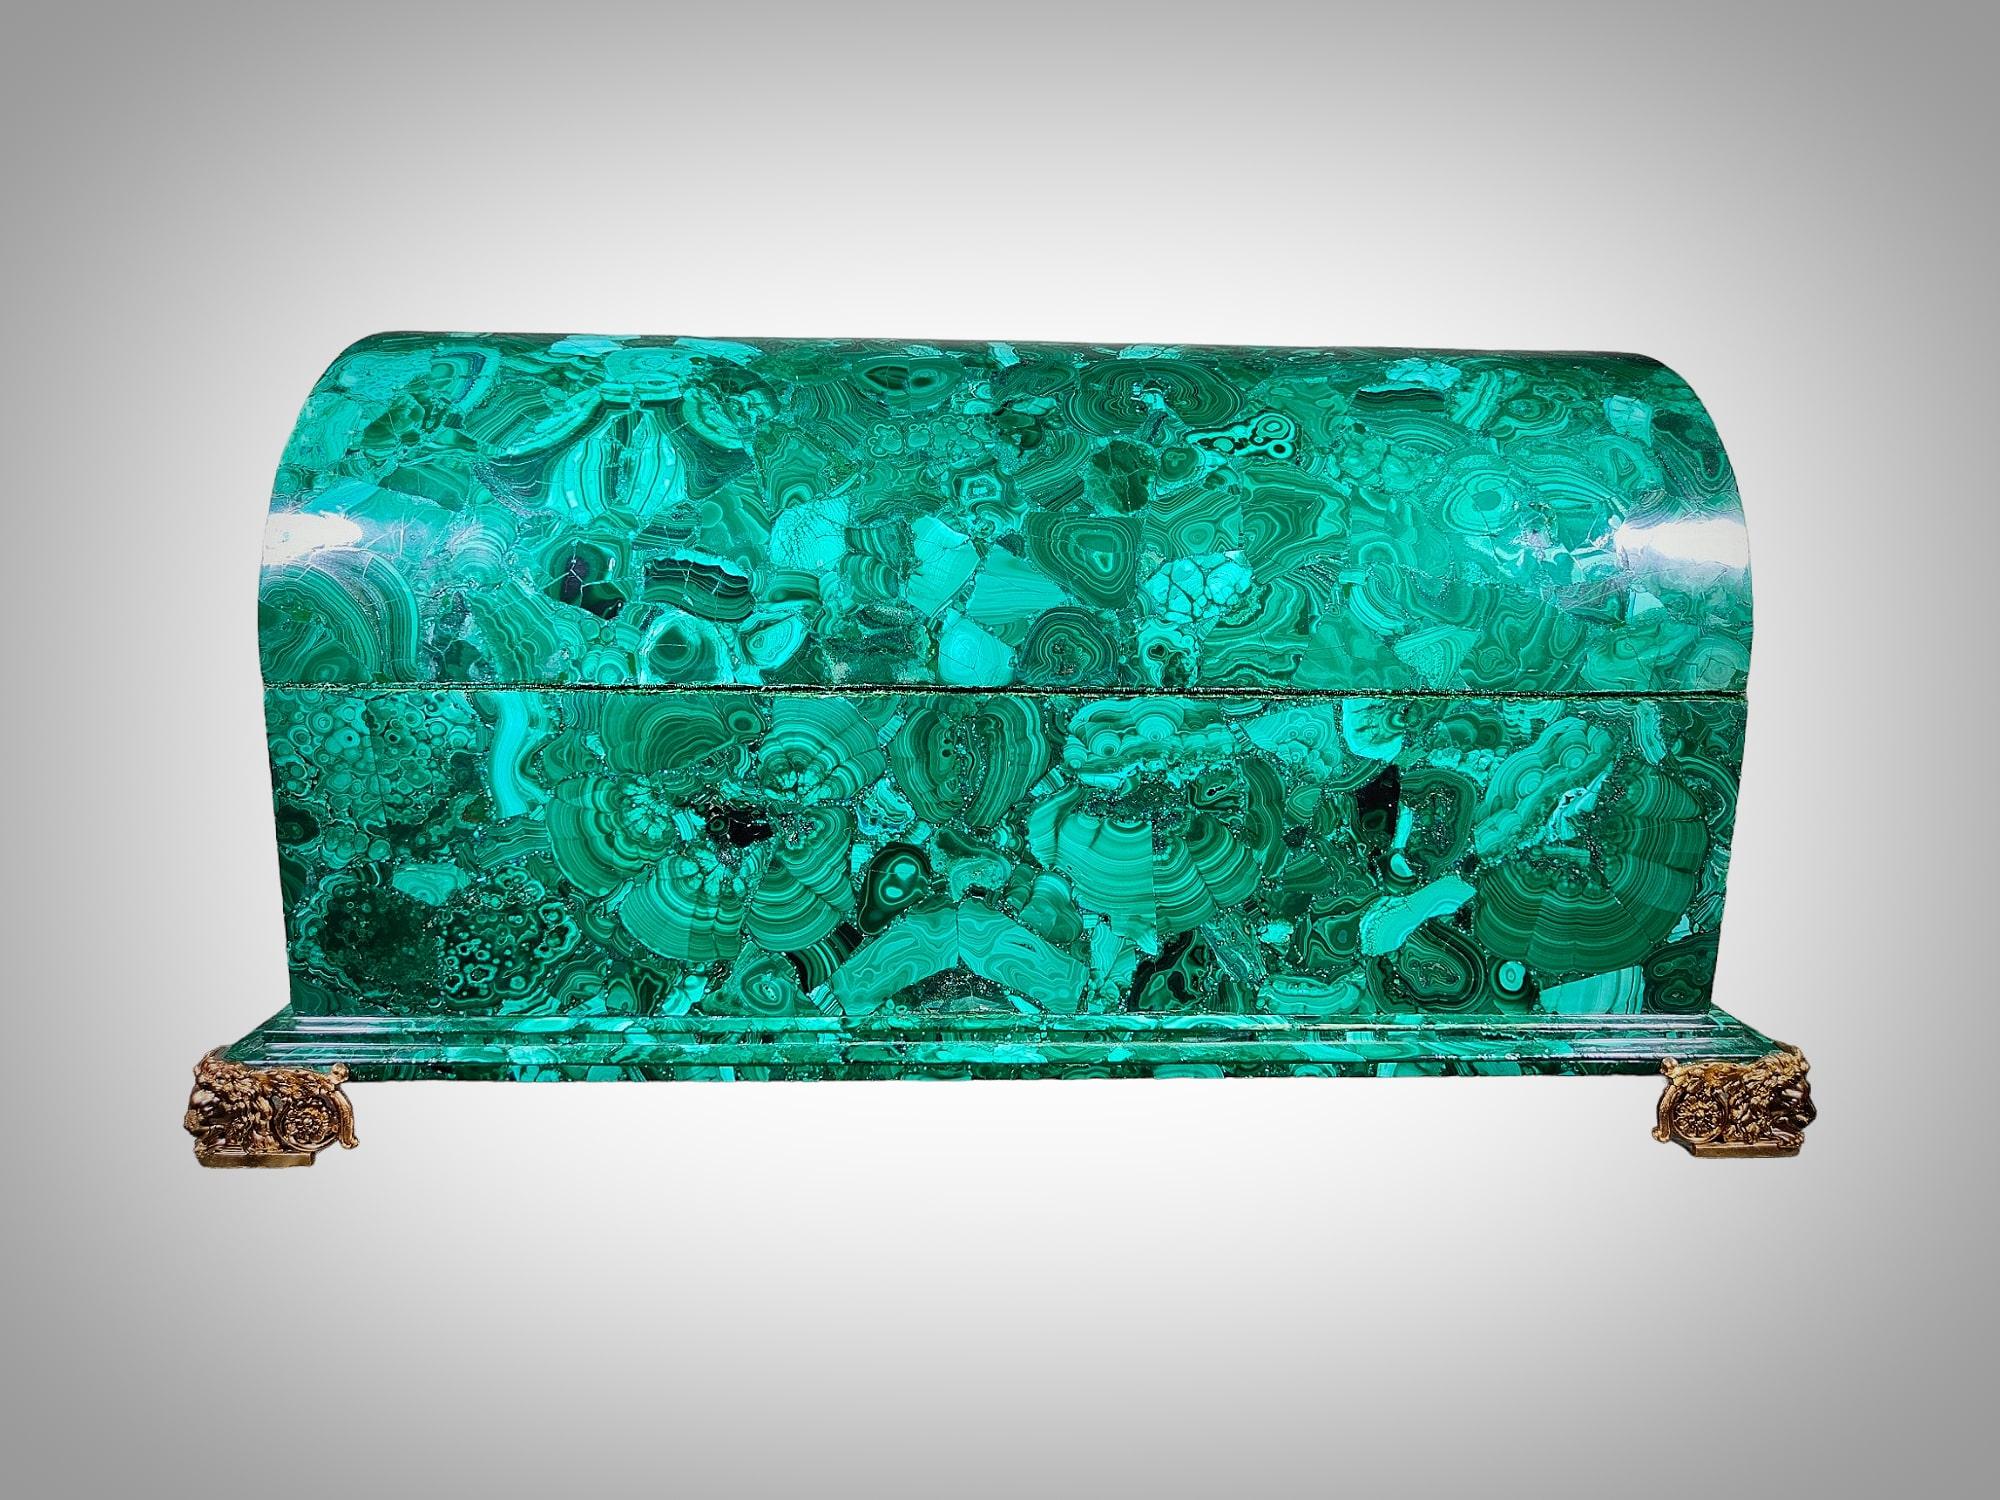 Product: Large 20th Century Malachite Box

Product Description:

Material: Malachite (semi-precious stone)
Age: 20th Century
Condition: Excellent
Dimensions: 70 x 40 x 33 cm (length x width x height)
Features and Details:
This large malachite box is